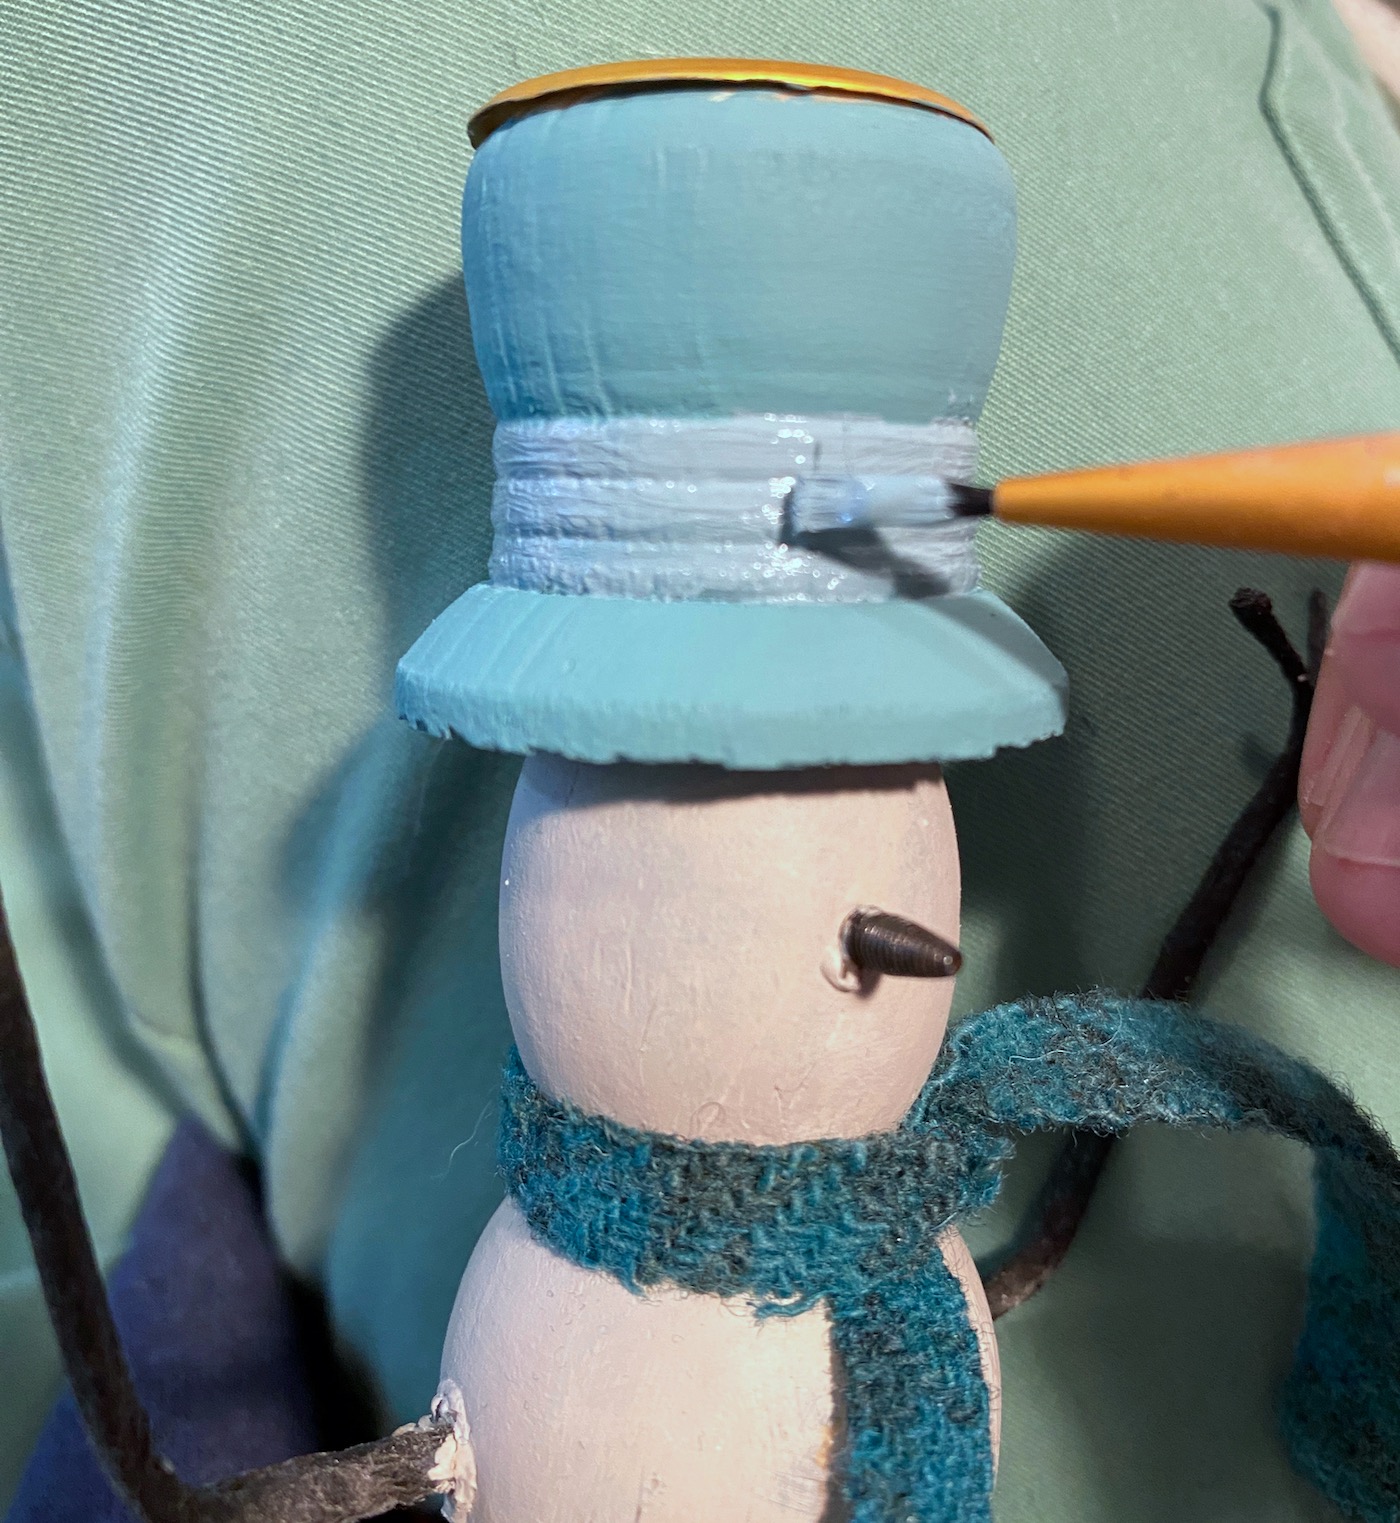 Painting the band of the hat with light blue chalk paint